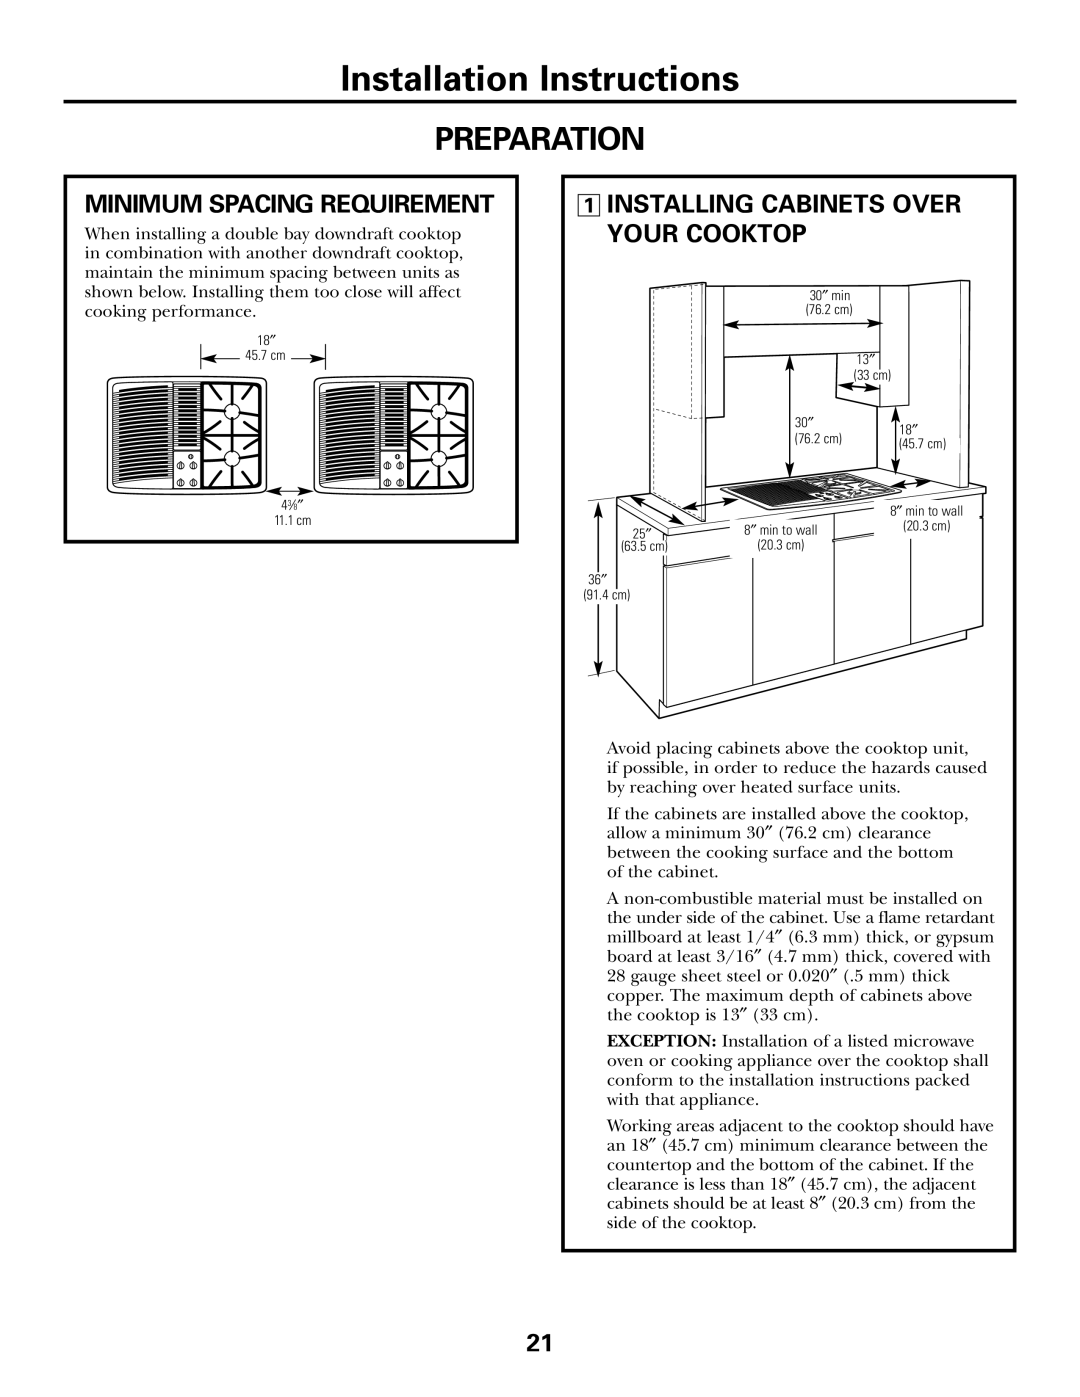 GE JGP990 Installation Instructions, Preparation, Minimum Spacing Requirement, 1INSTALLING CABINETS OVER YOUR COOKTOP 